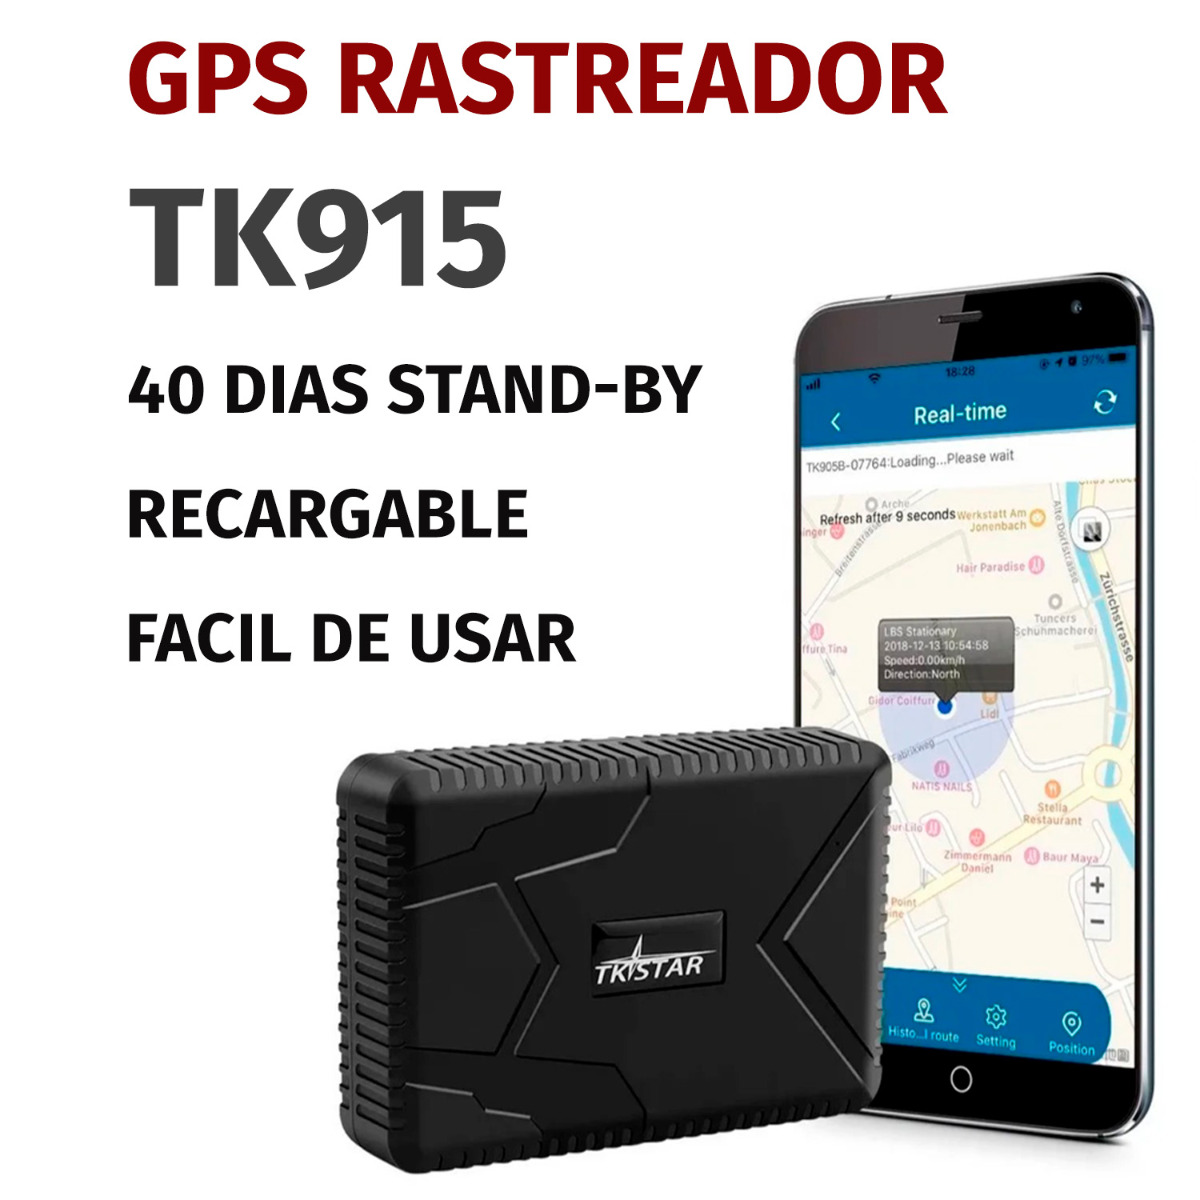 GPS Tracker TK915 Tiempo Real 40 Dias Stand-By